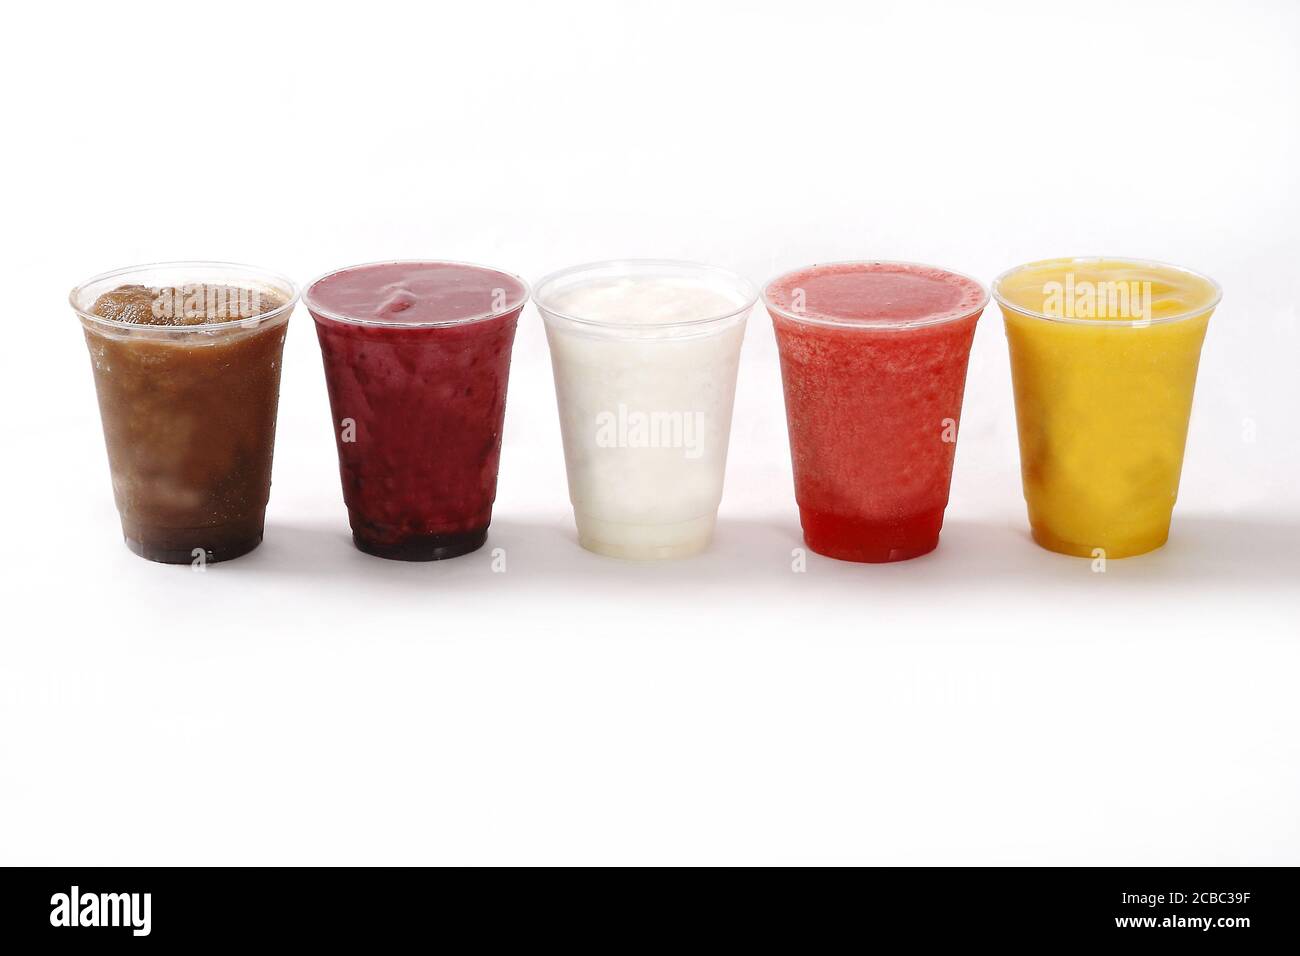 https://c8.alamy.com/comp/2CBC39F/colorful-line-of-different-smoothies-in-plastic-cups-on-white-background-2CBC39F.jpg